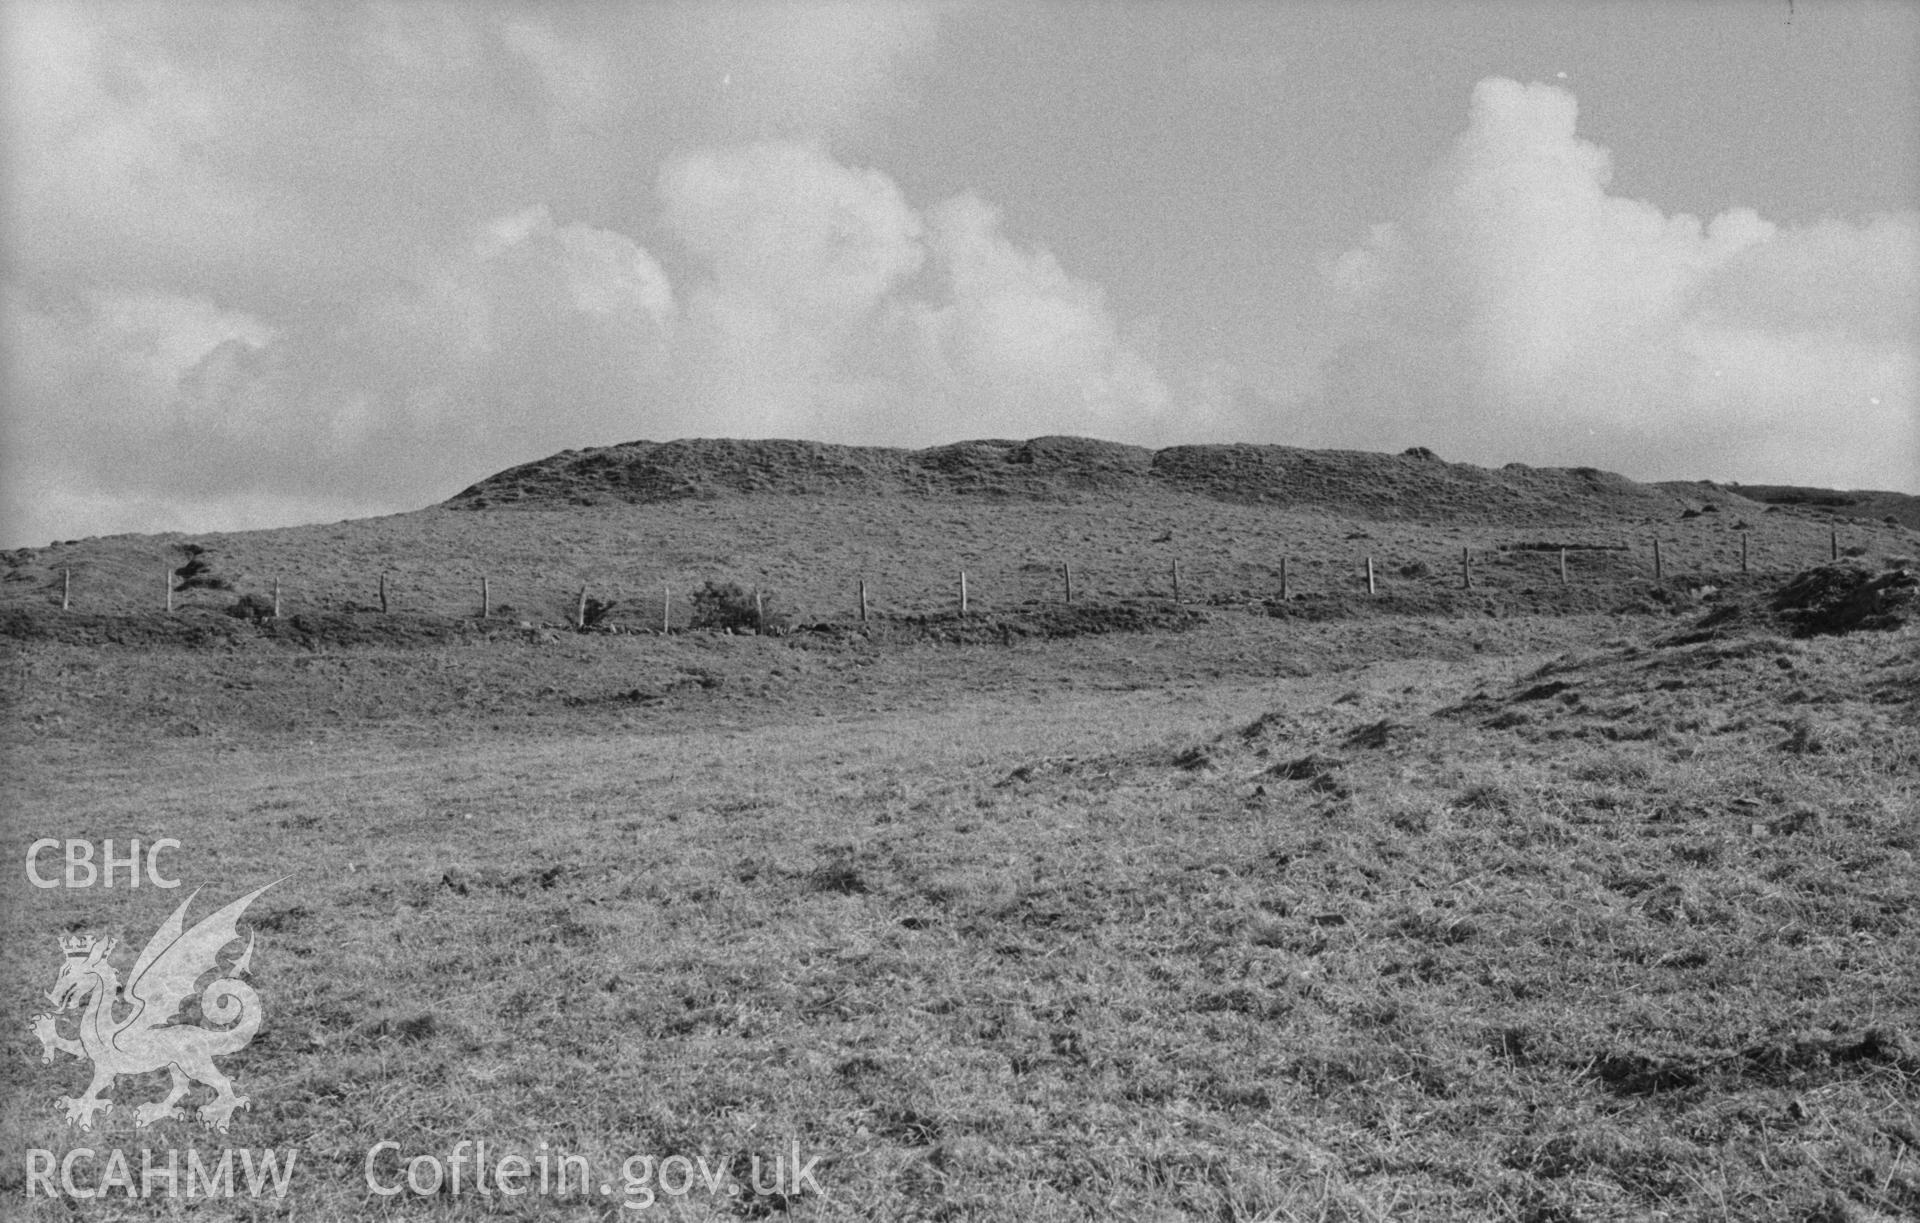 Digital copy of a black and white negative showing the north west corner of Pen Dinas, Elerch. Photographed in April 1963 by Arthur O. Chater from Grid Reference SN 676 878, looking south east.